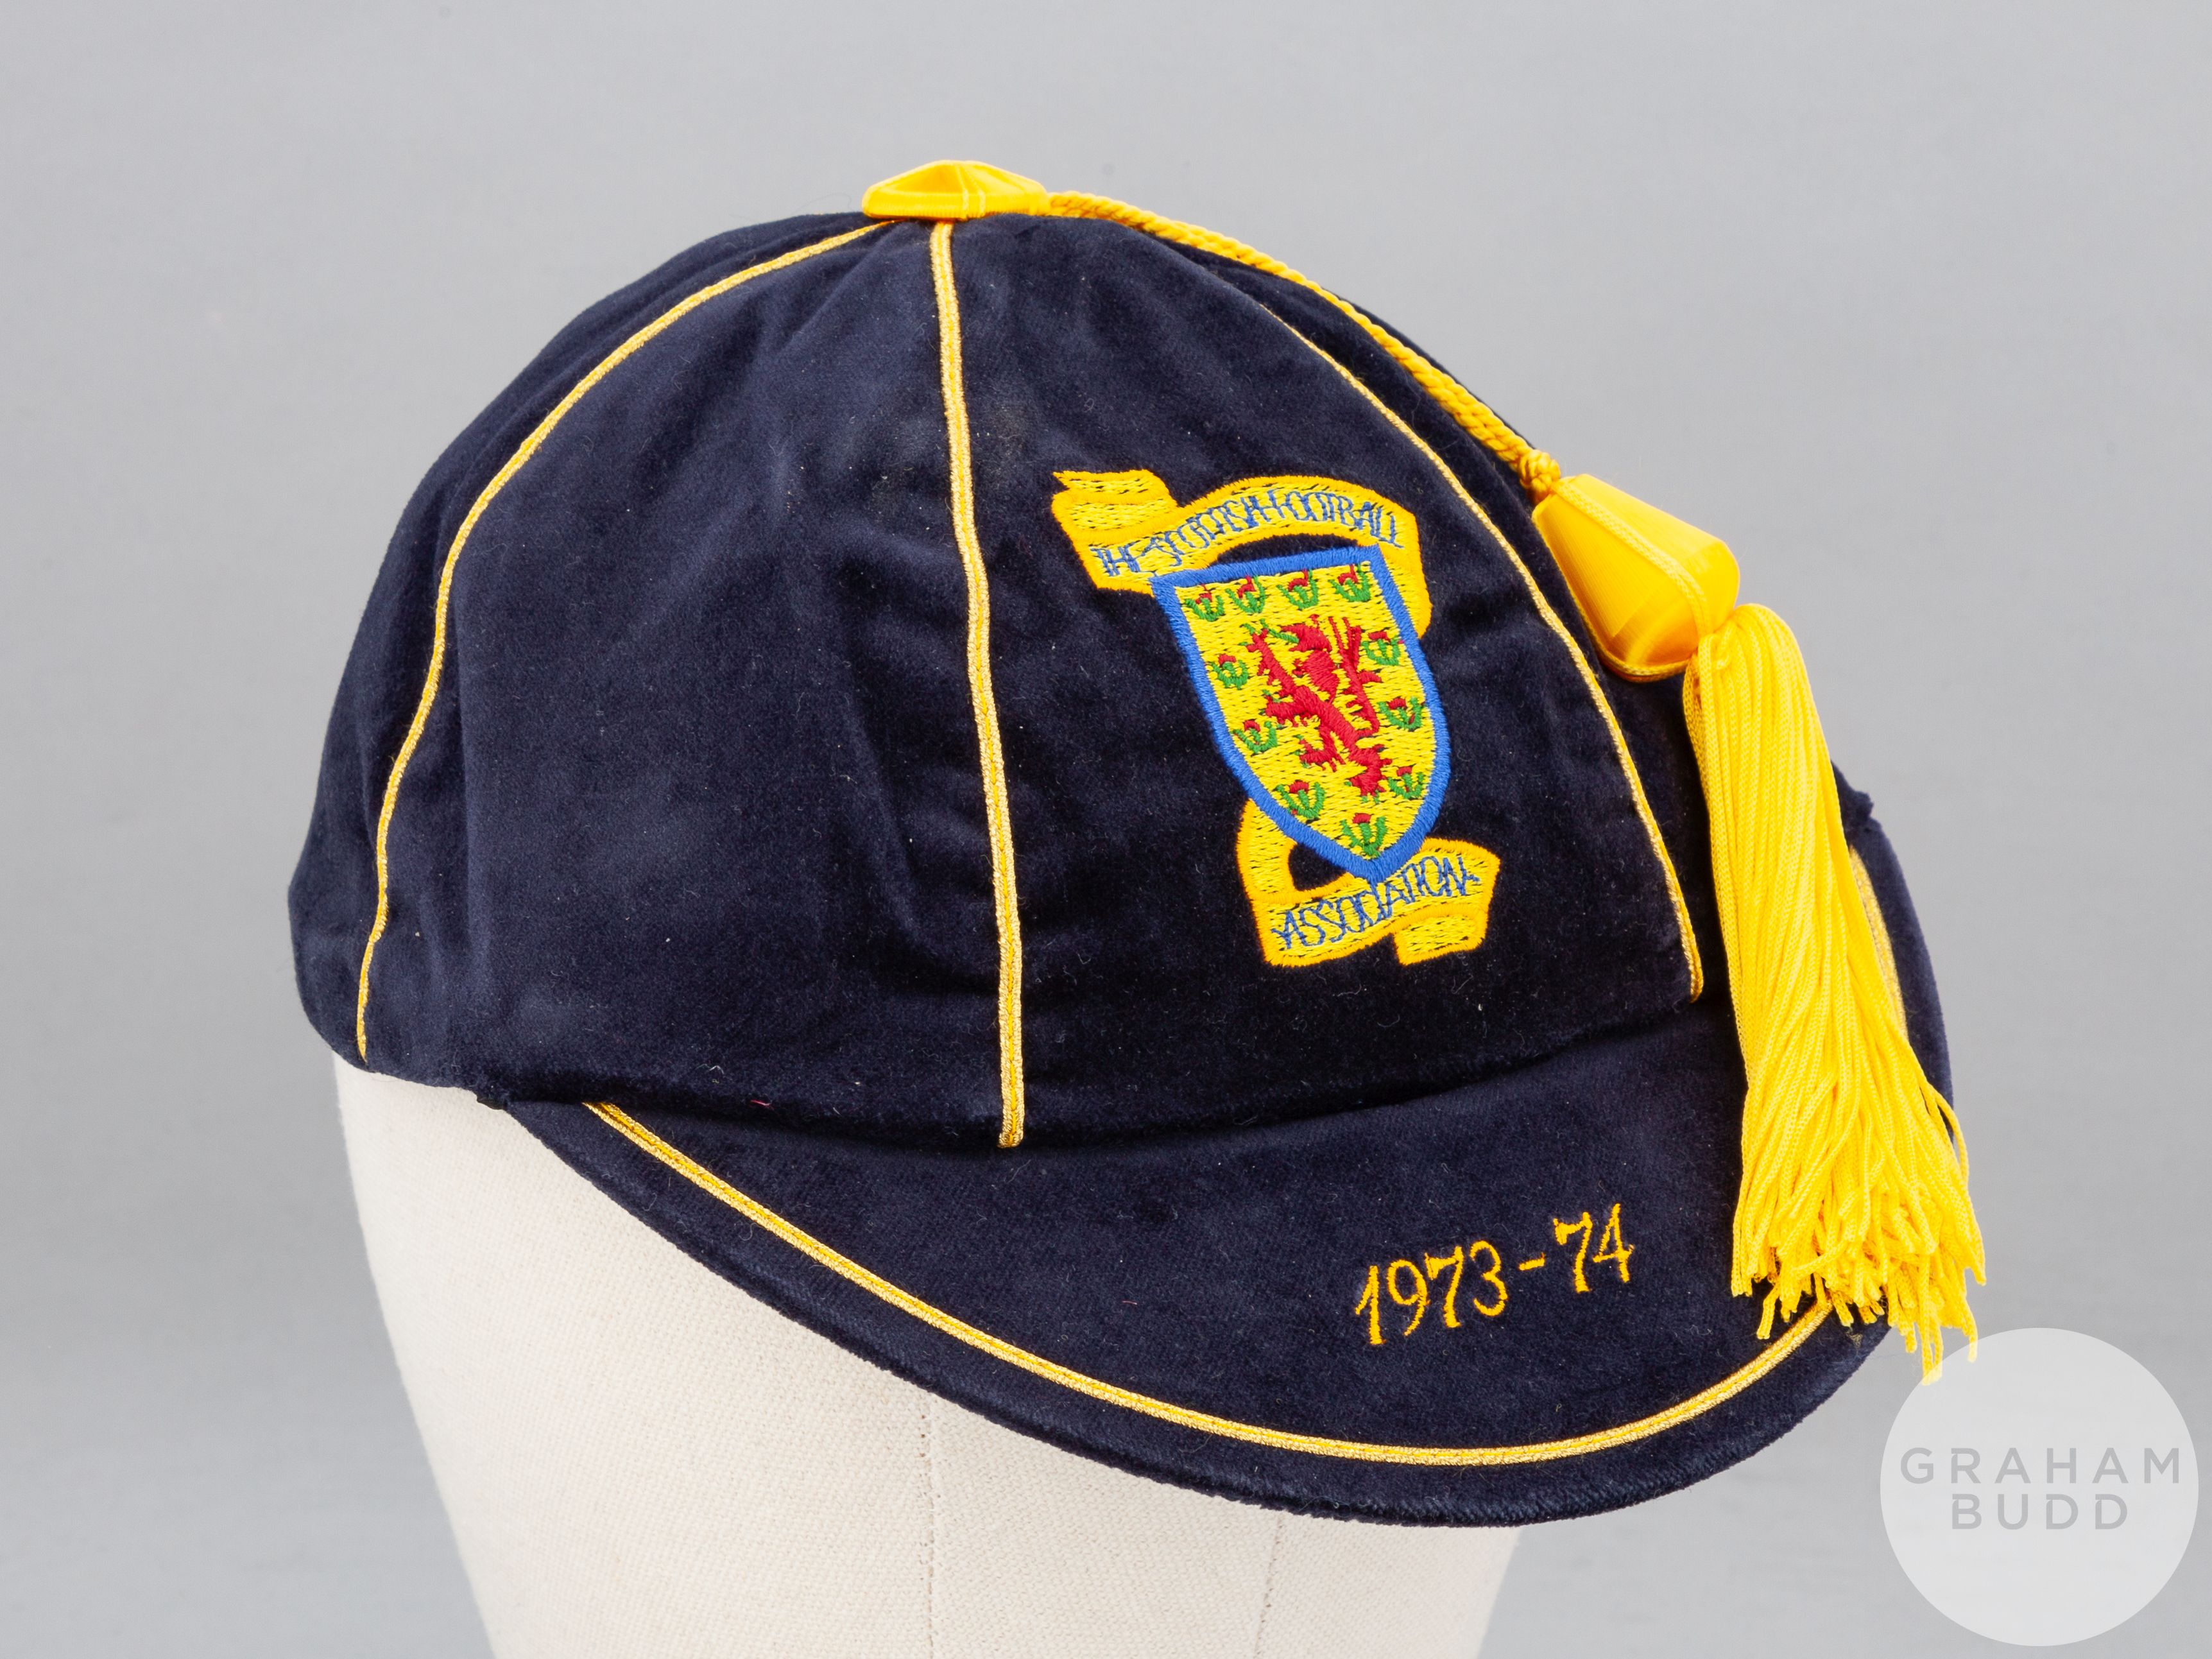 George Connelly blue Scotland v. Czechoslovakia and West Germany International cap, 1973-74